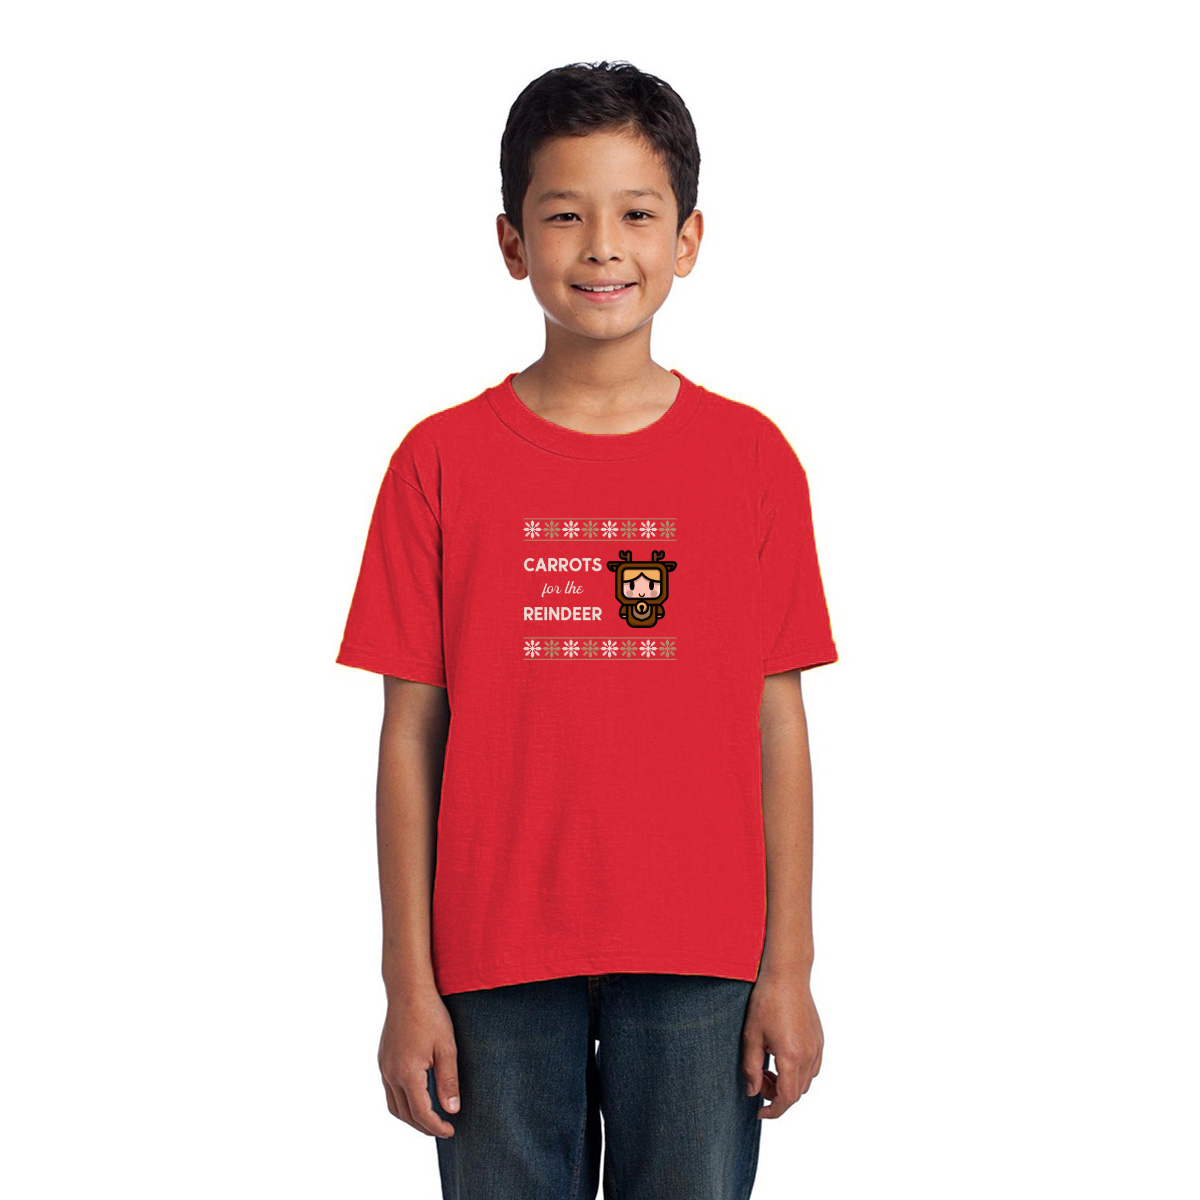 Carrots for the Reindeer Kids T-shirt | Red